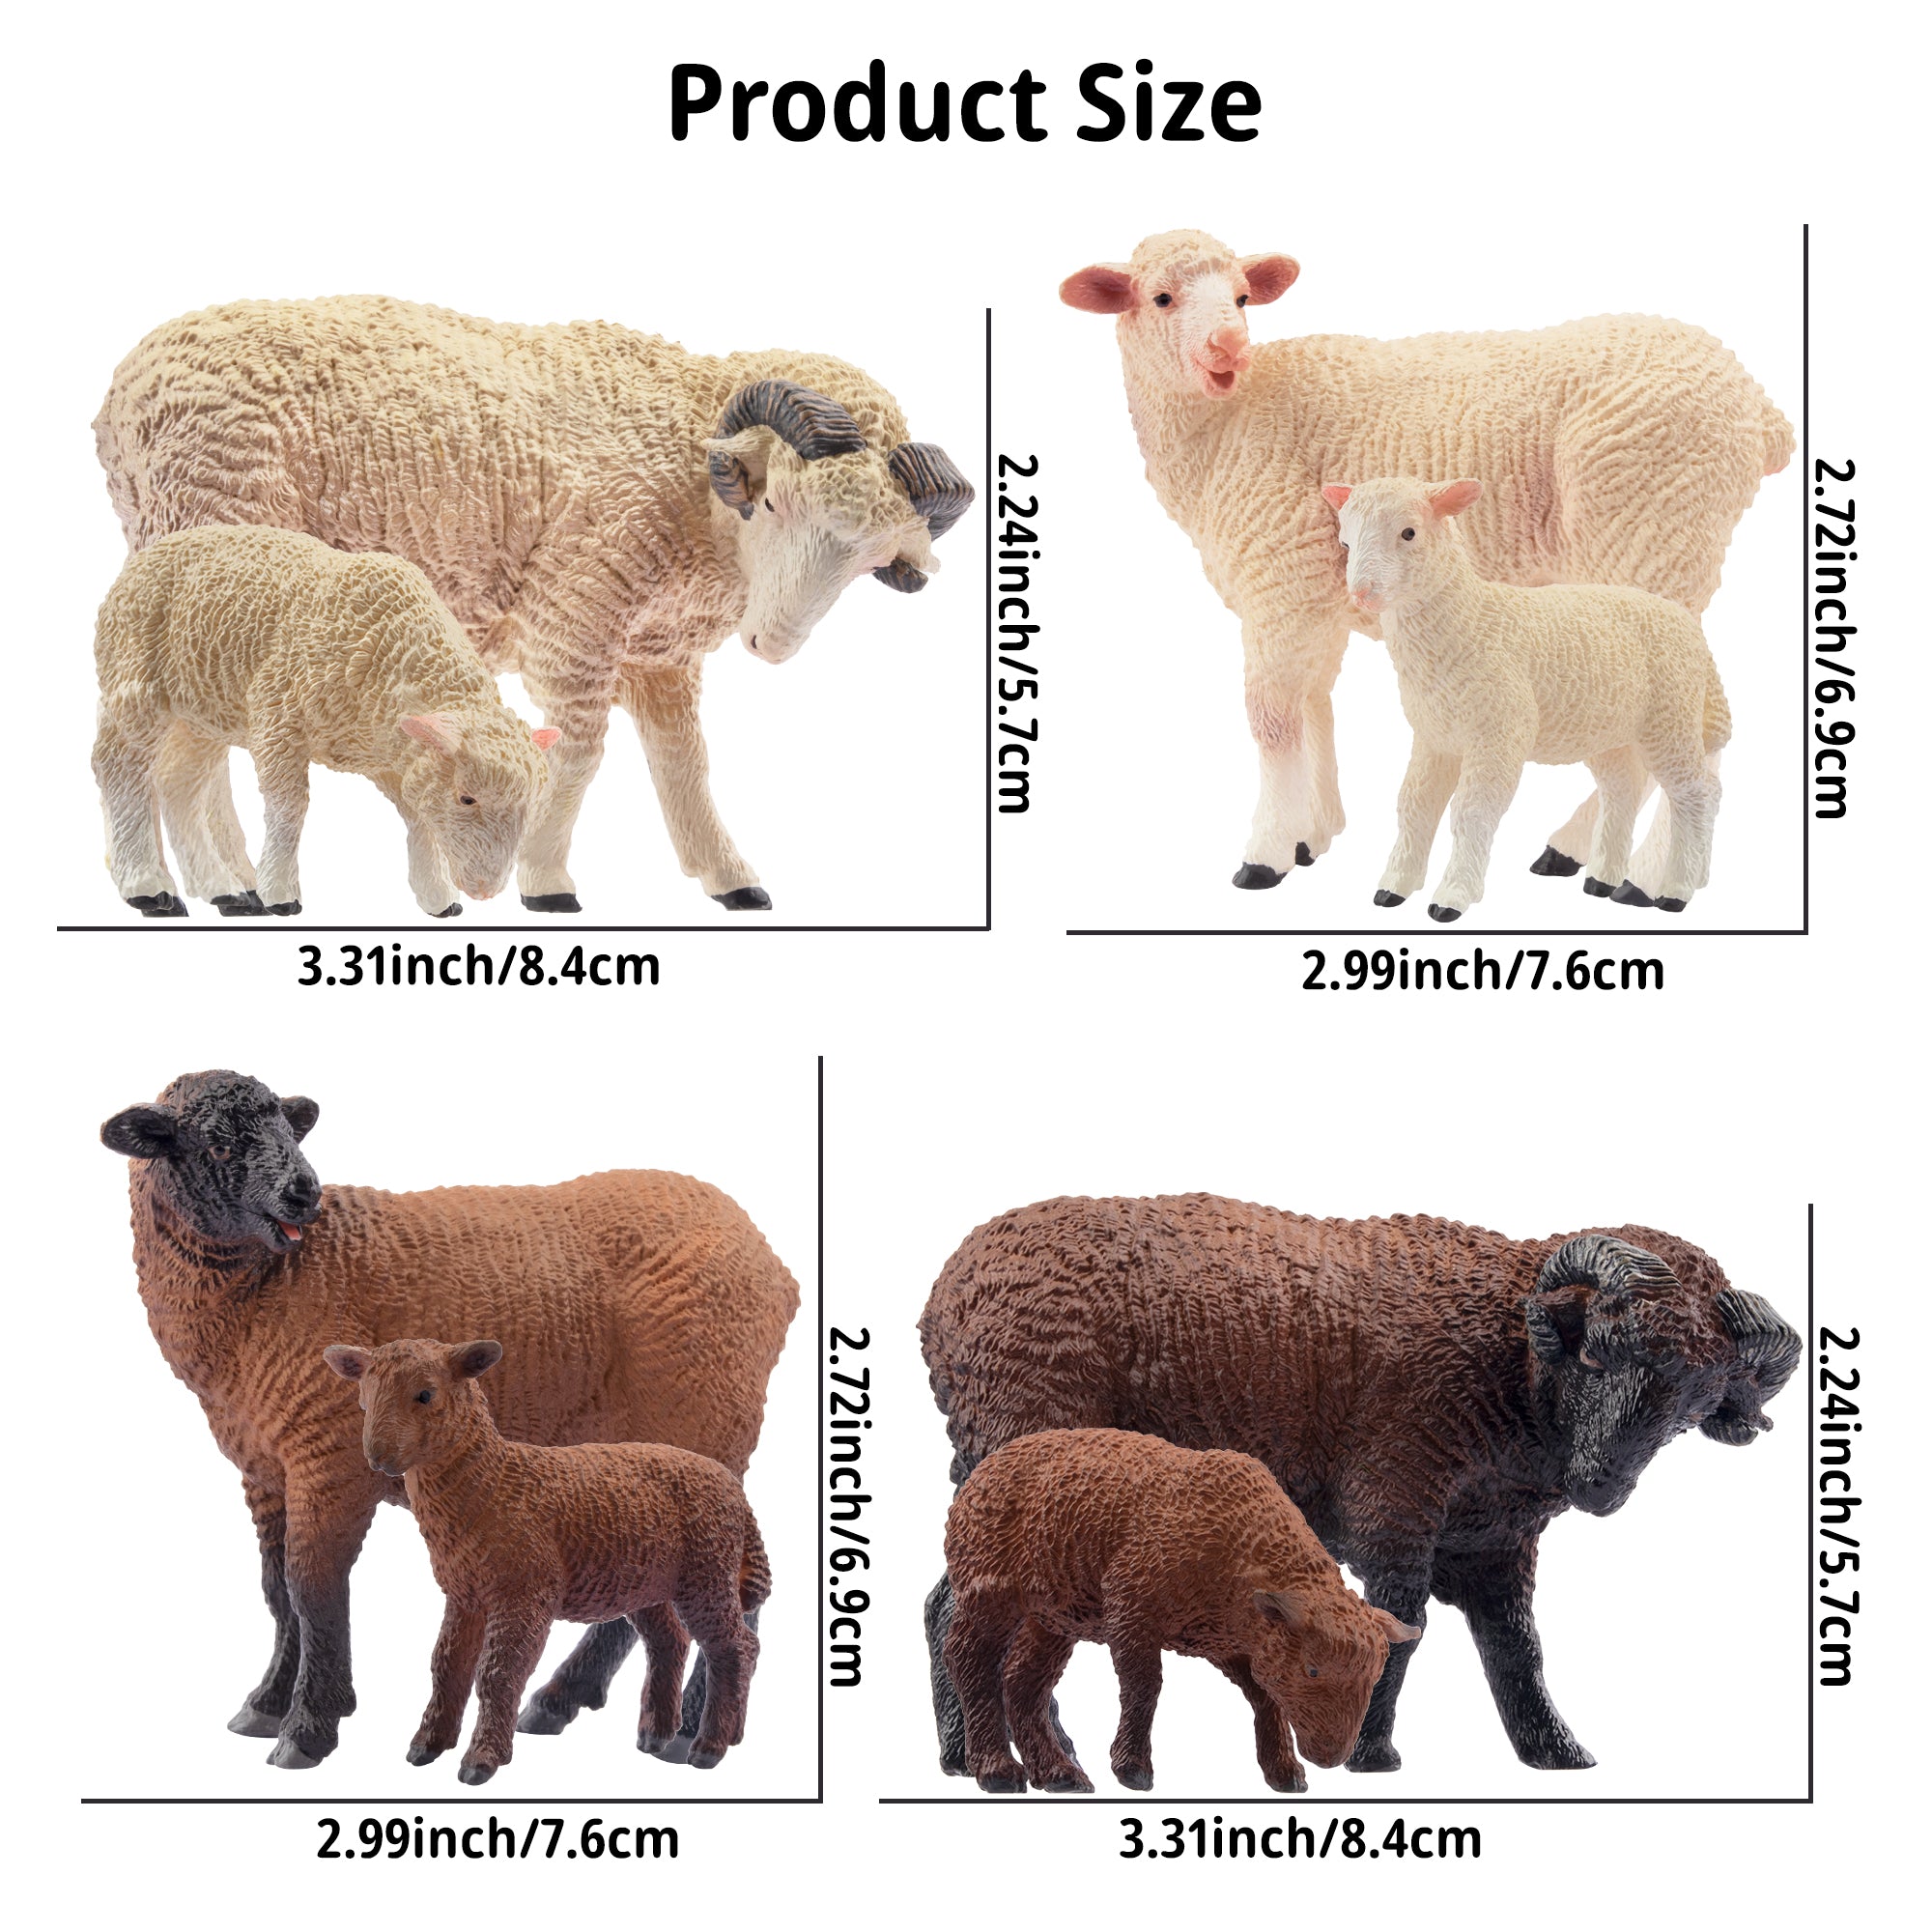 8-Piece Merino Sheep Figurines Playset with Adult & Baby Sheep-size